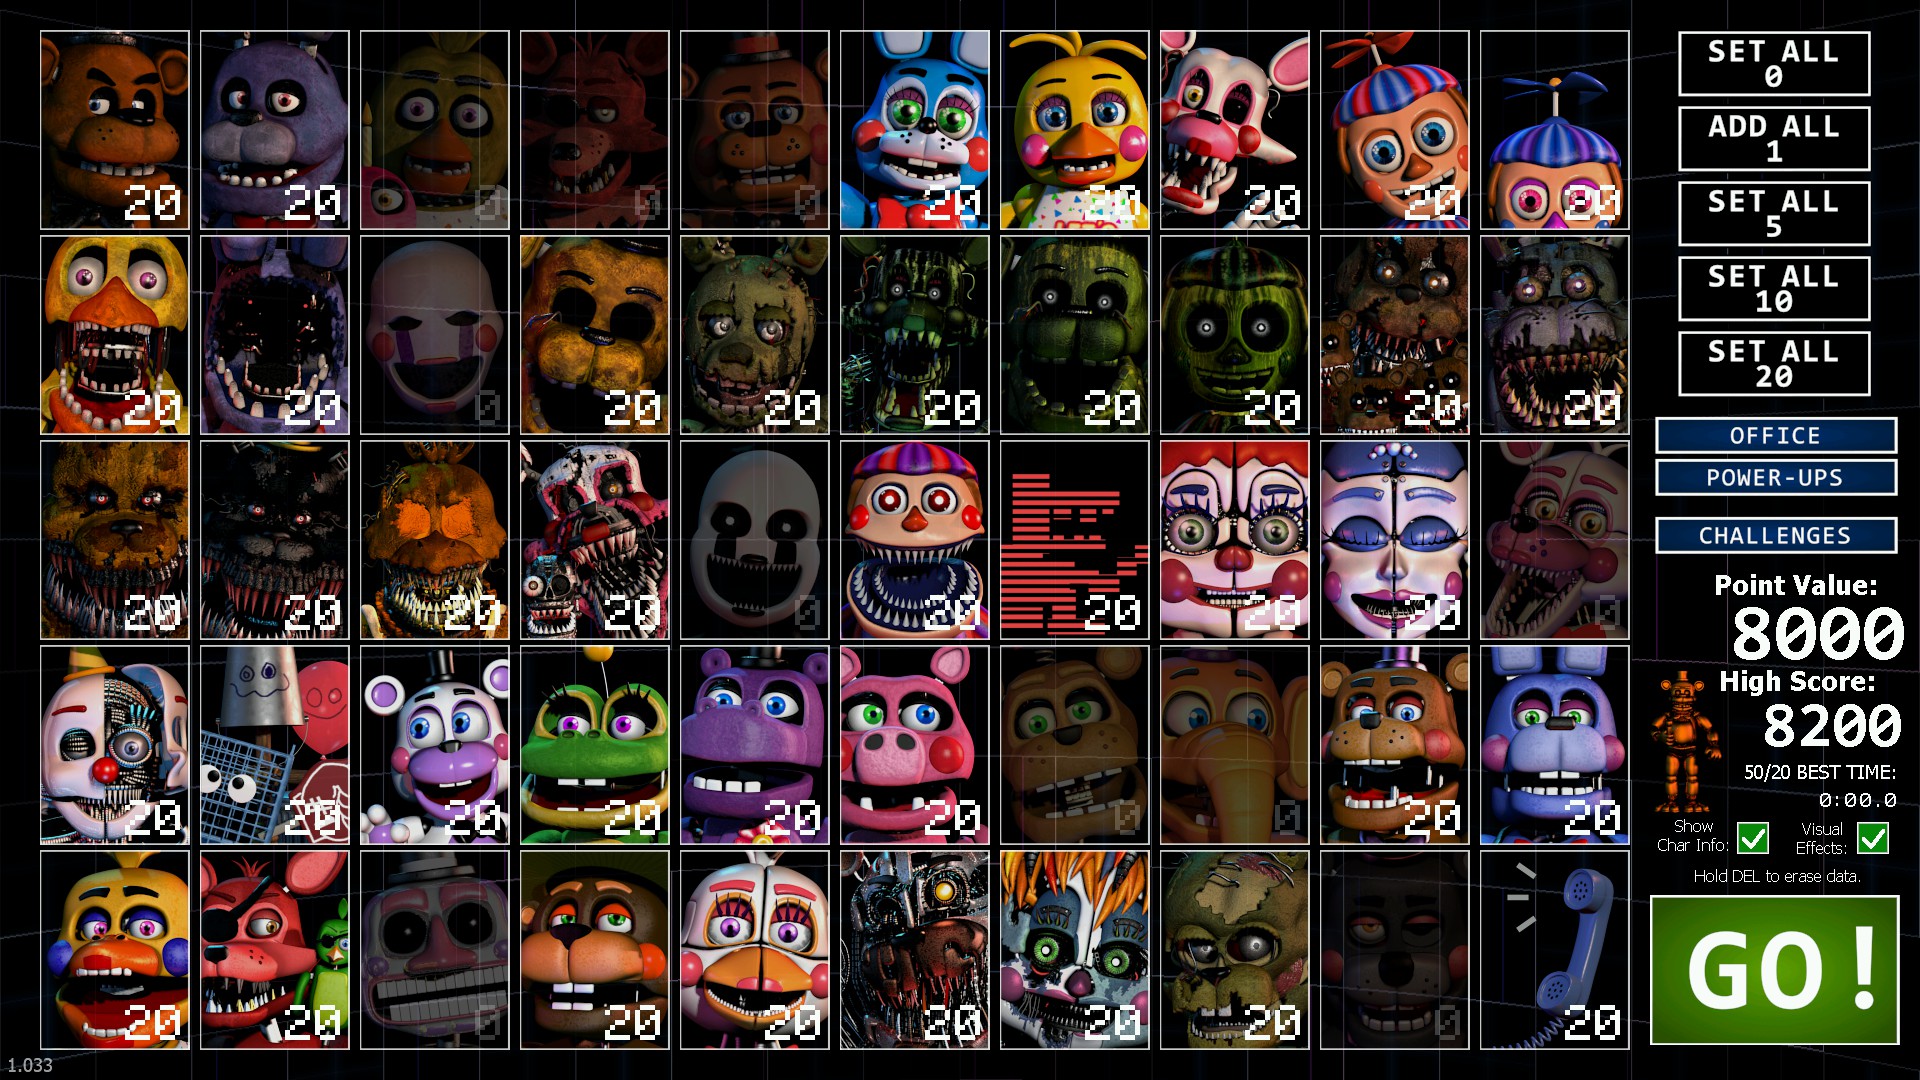 An easy way to get 8000 points for Ultimate Custom Night